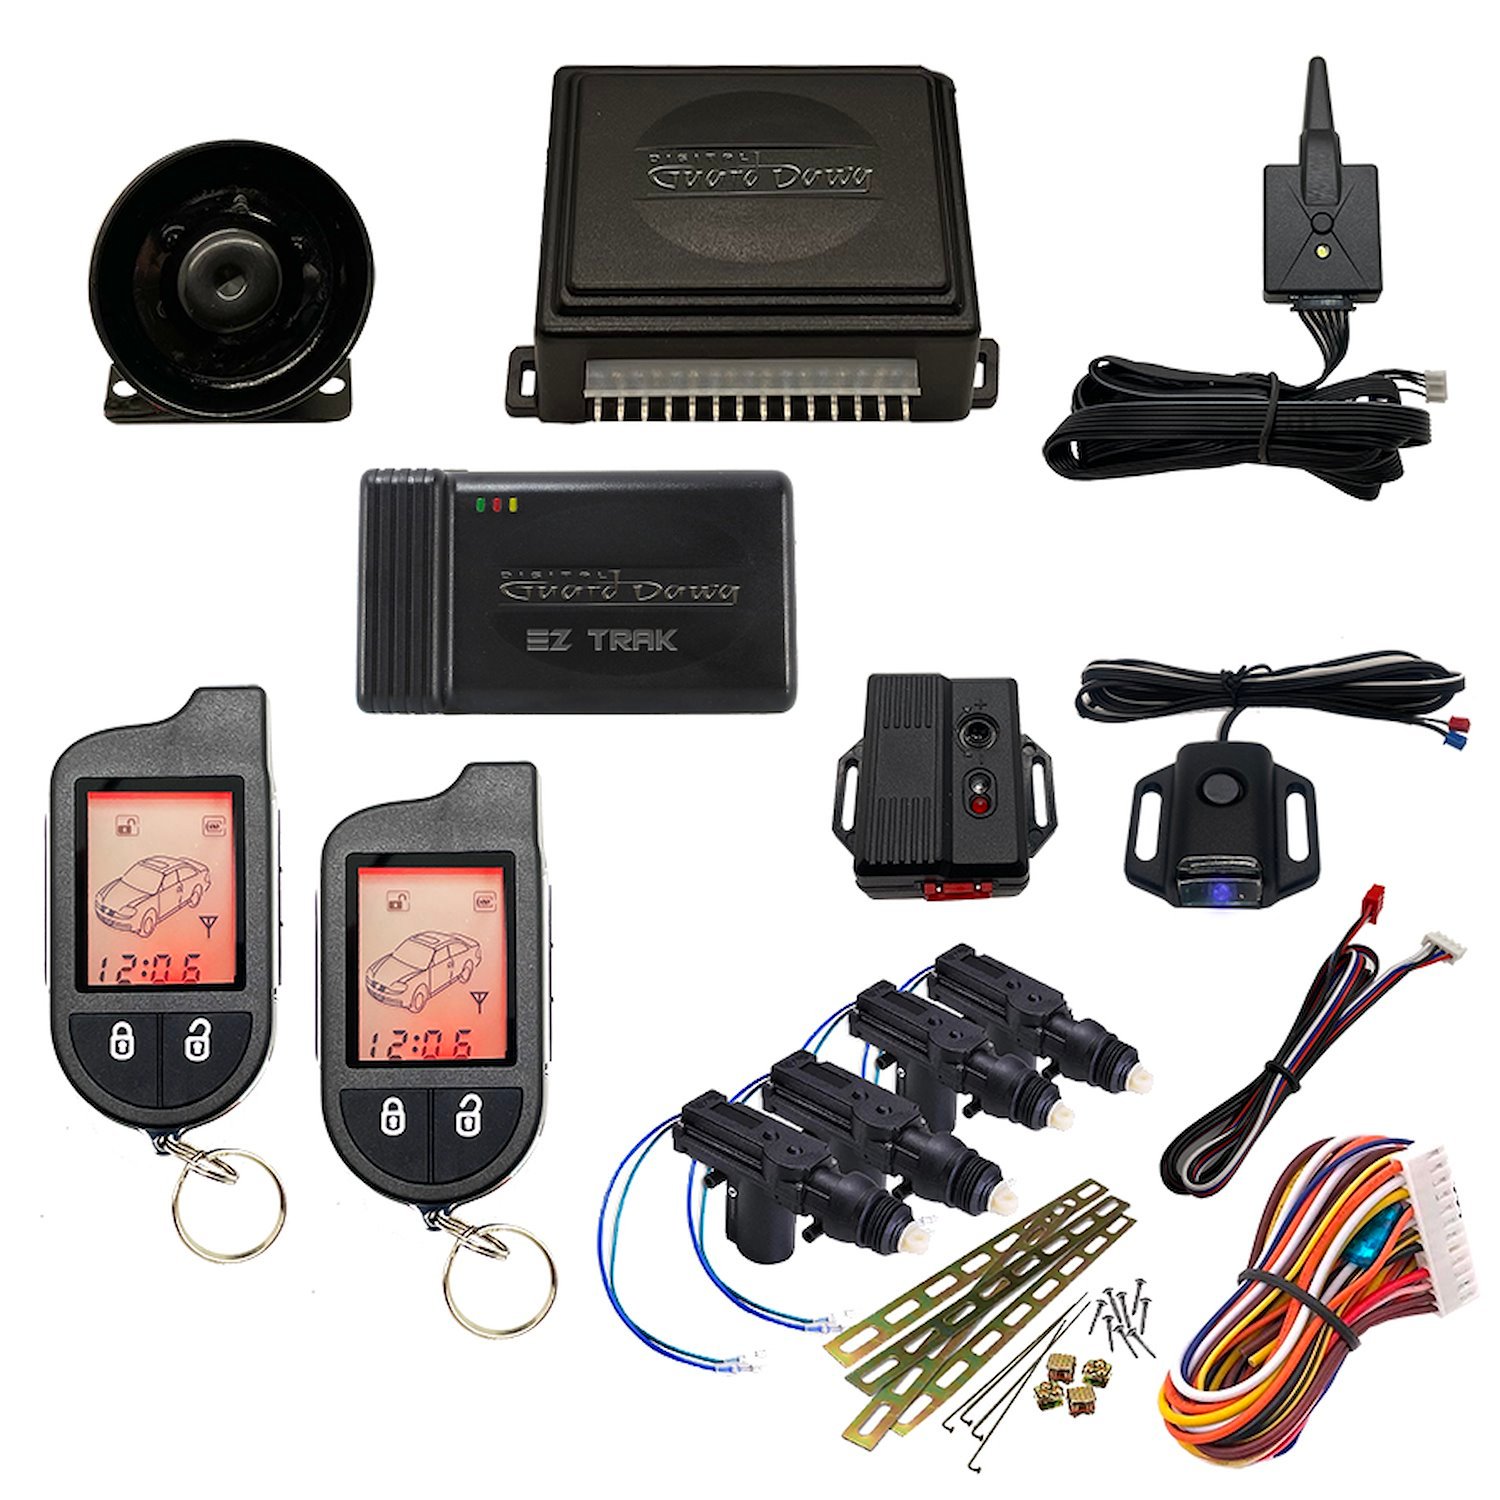 DGD-KY-ALM-2-4A-EZ Keyless Entry and Alarm System, 2-Way, w/4-Door Actuator Kit and Smart Phone EZ-Tracking